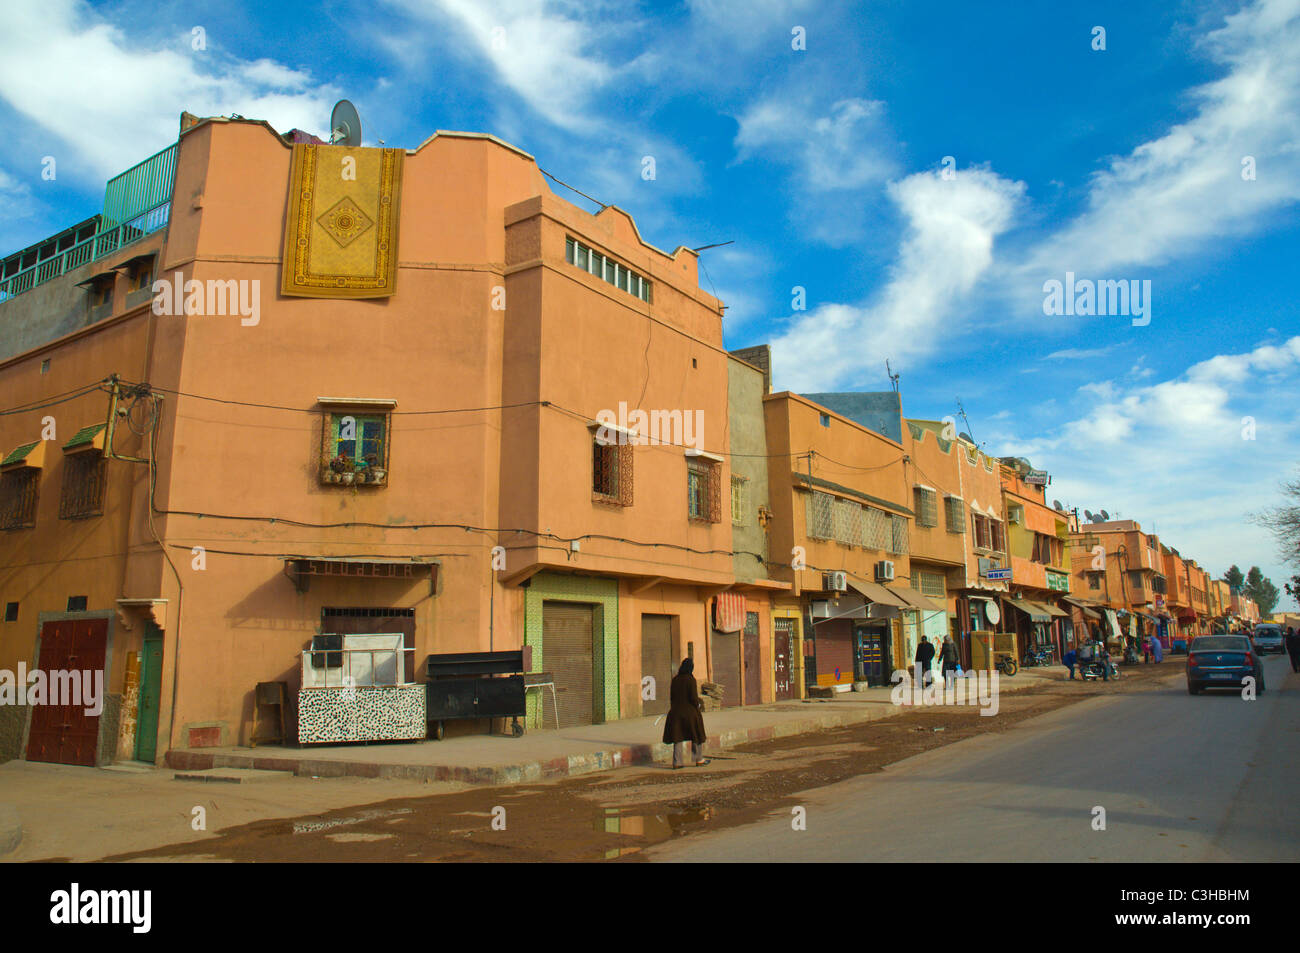 Street scene in the outskirts of Medina old town Marrakesh central Morocco Africa Stock Photo